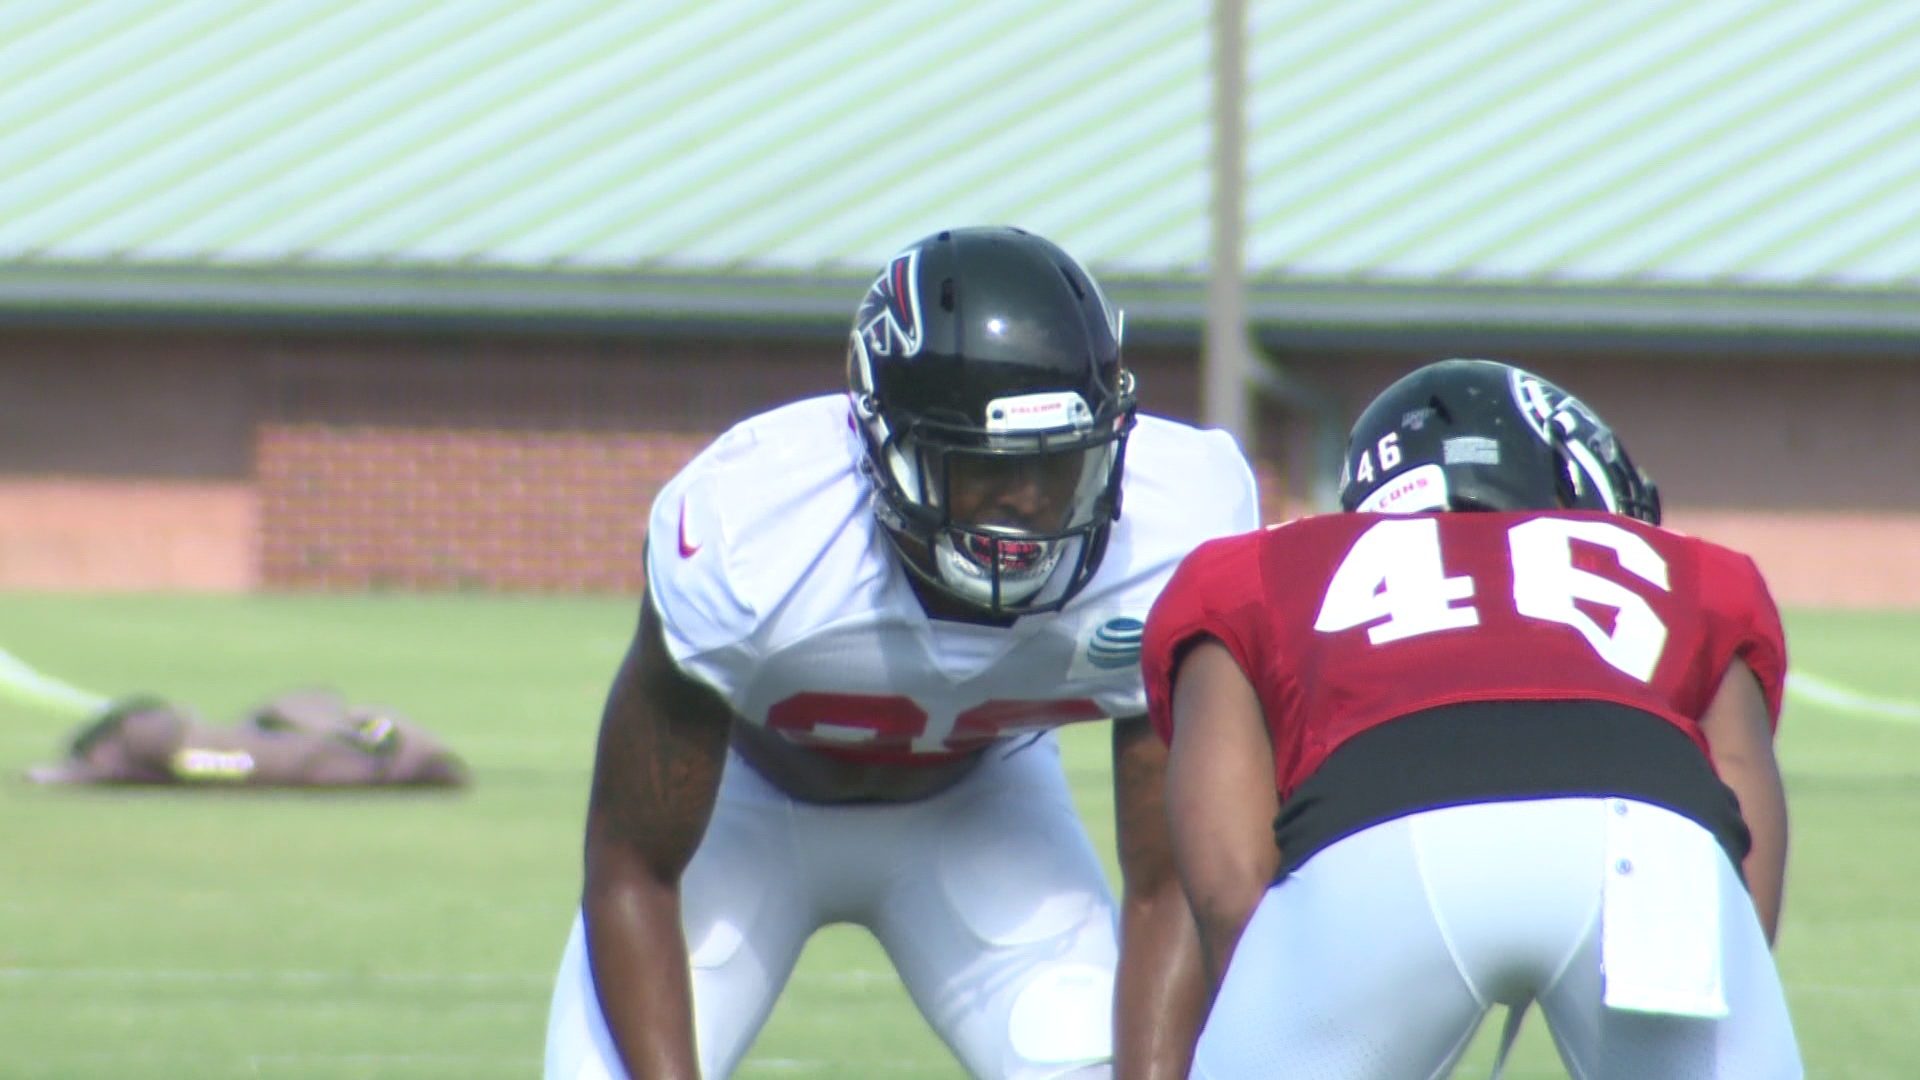 Since the early days of Jayson Stanley’s football career, playing in the NFL was his dream. The Atlanta Falcons are giving him a chance to make those dreams come true.